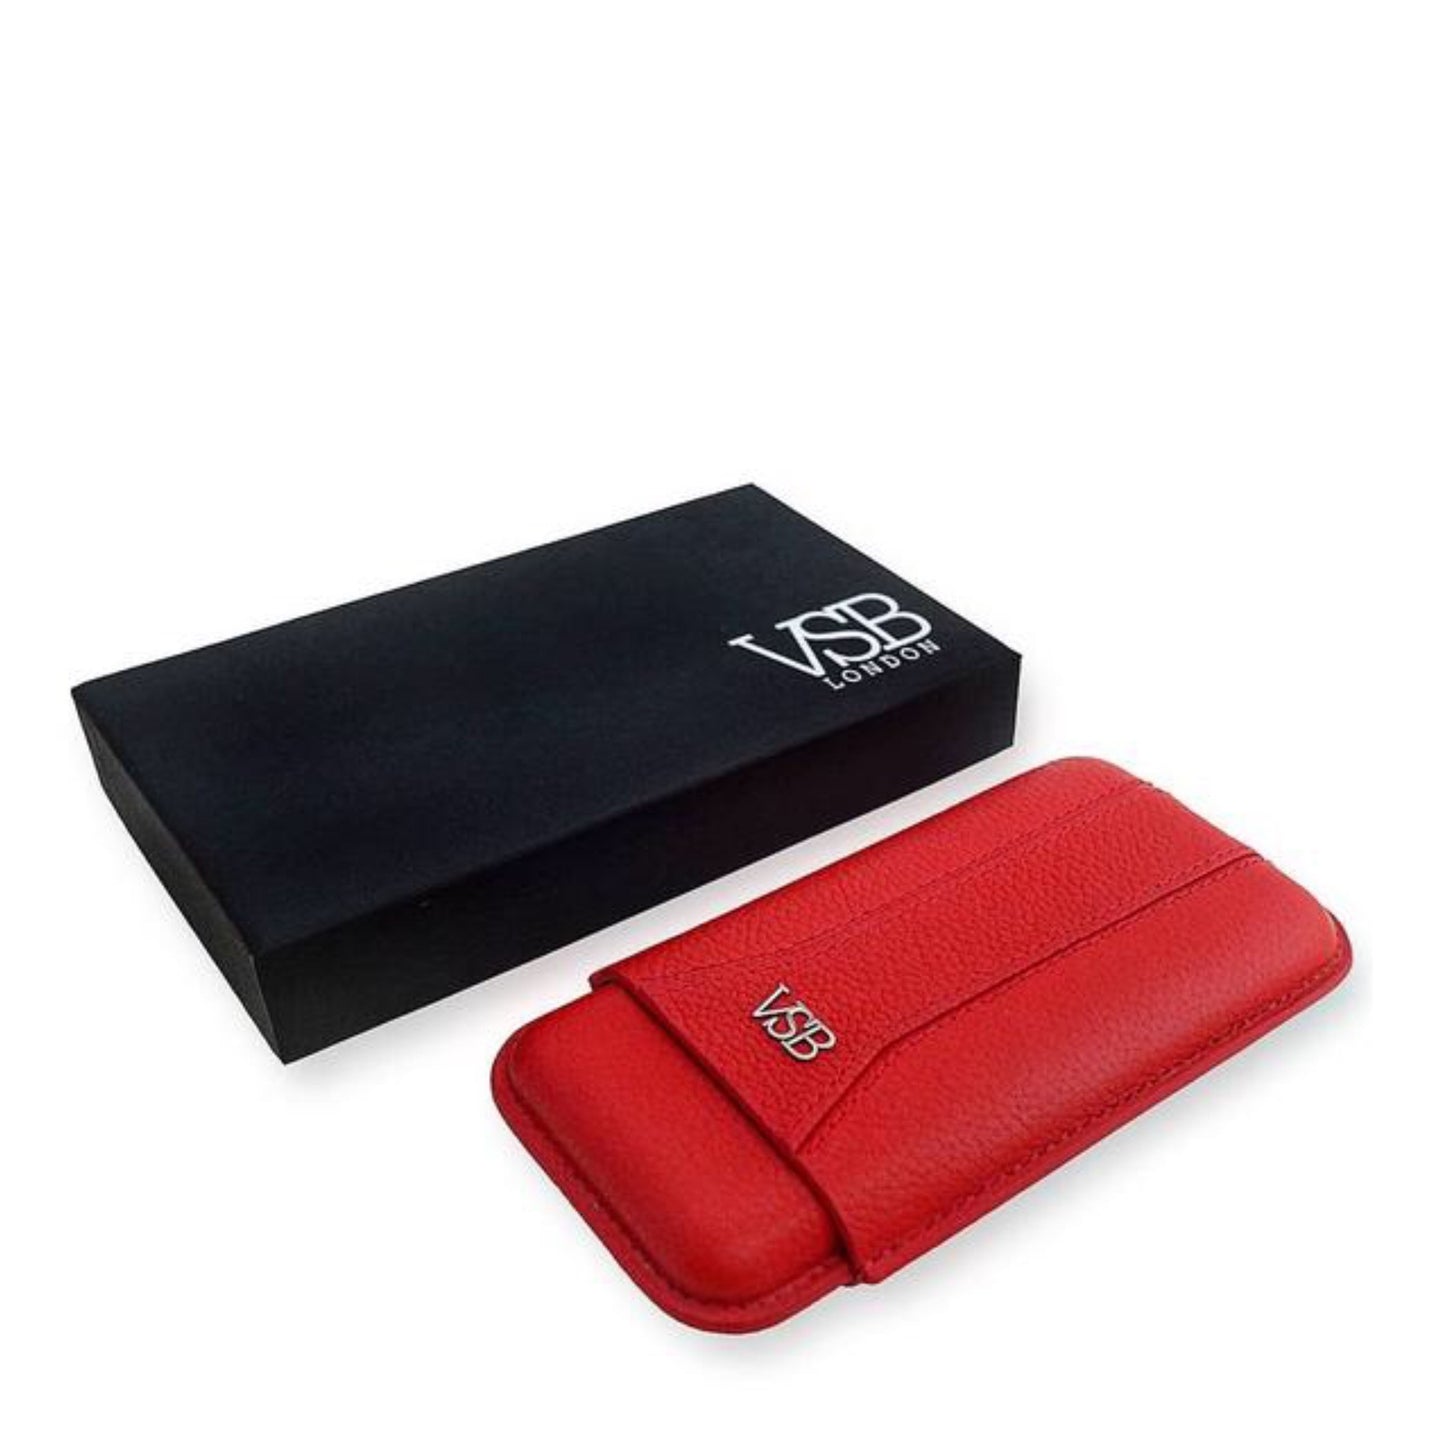 VSB London leather cigar case in red